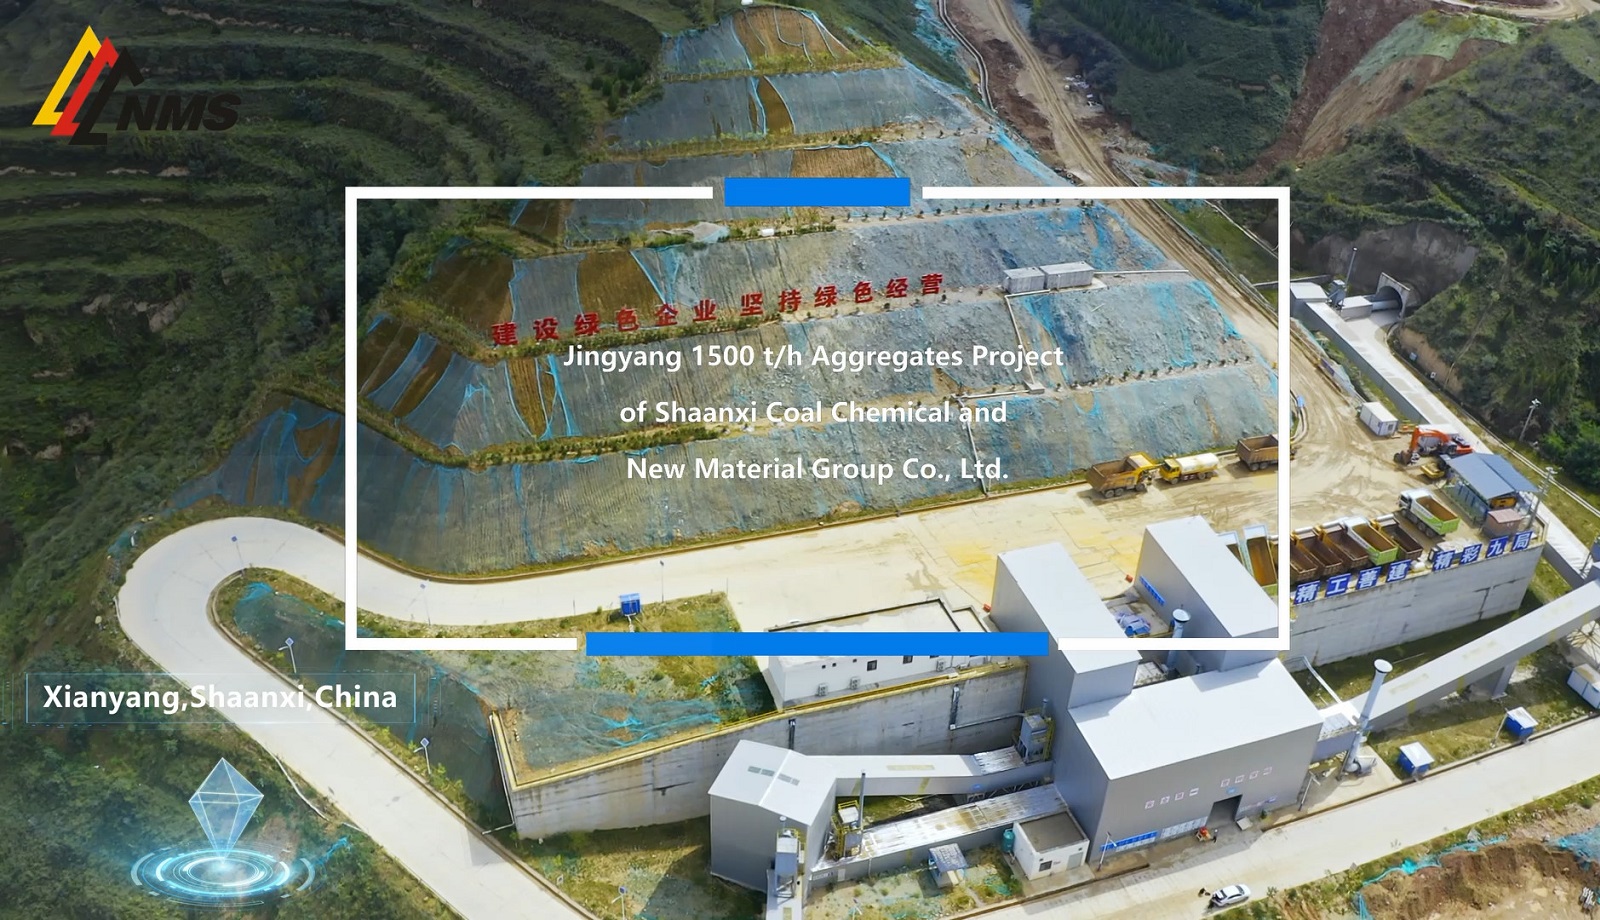 Jingyang 1500 t/h Aggregates Project of Shaanxi Coal Chemical and New Material Group Co. Ltd.